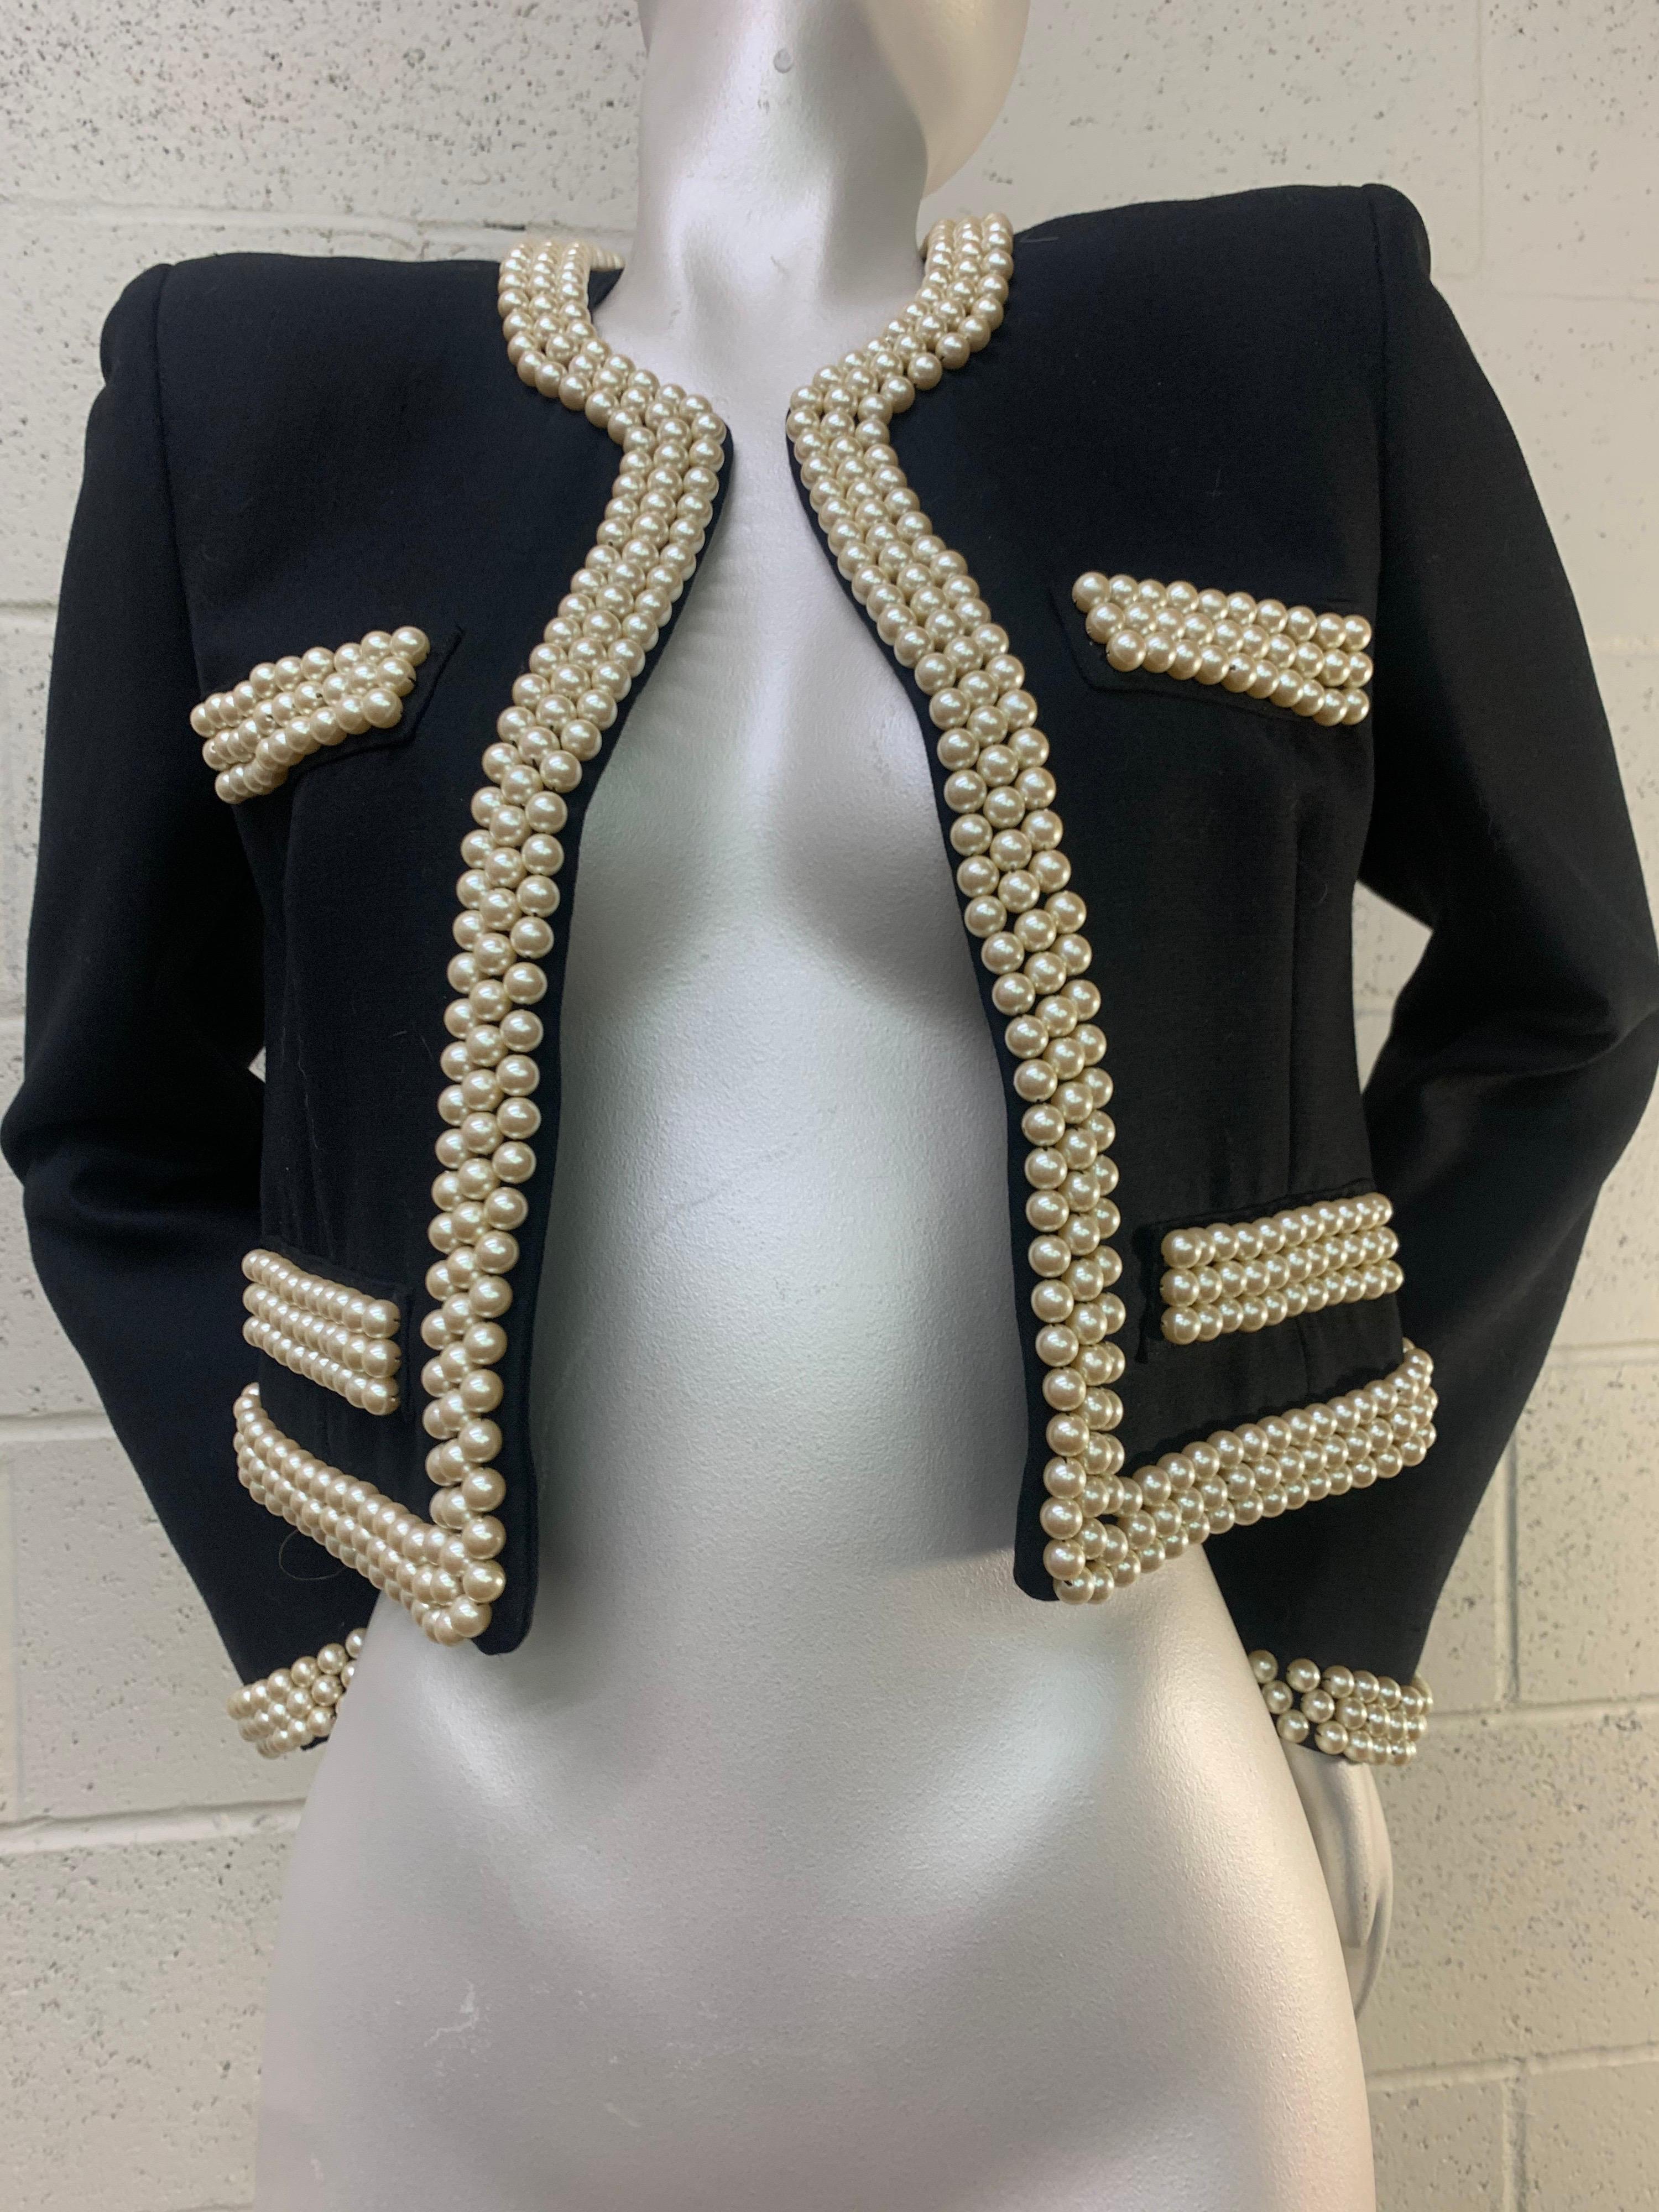 1980 Moschino Couture Black Cropped Chanel-Styled Jacket w/ Three Rows of Pearl Studded Trim: Fully lined. No closures. Size 6